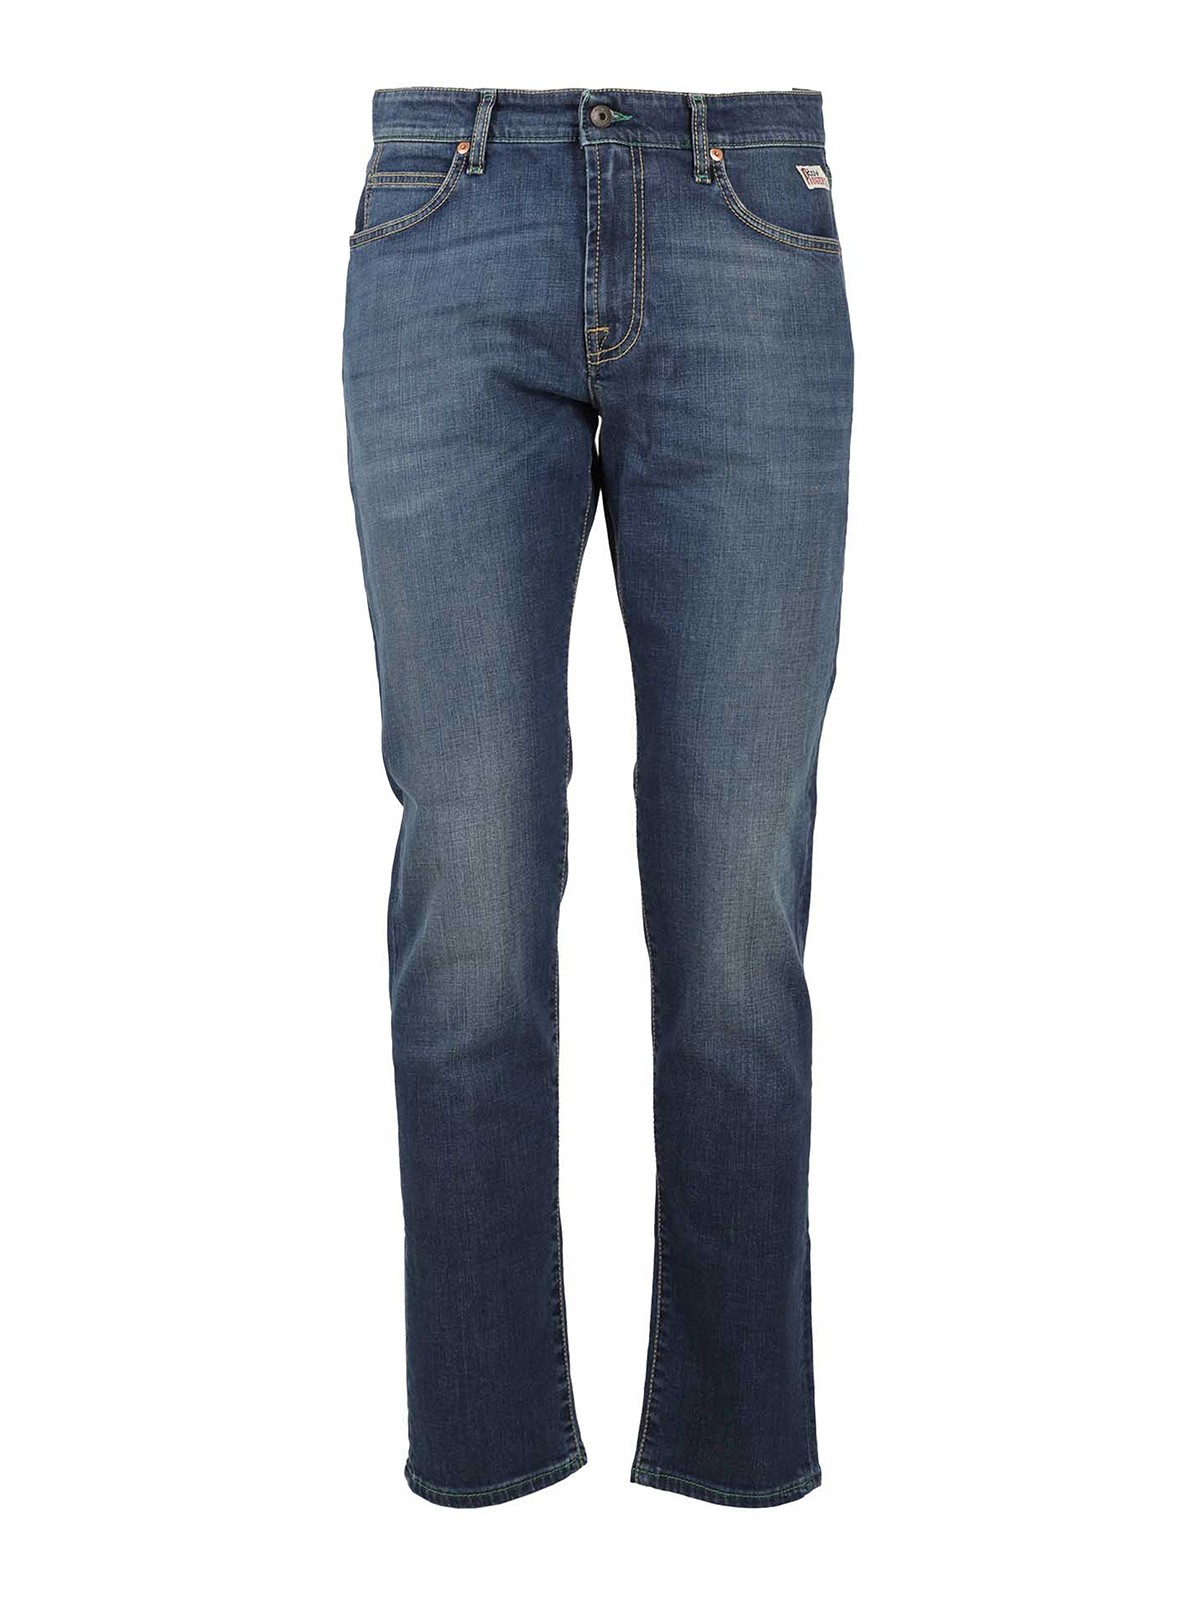 ROY ROGERS FIVE-POCKET BOOTCUT JEANS